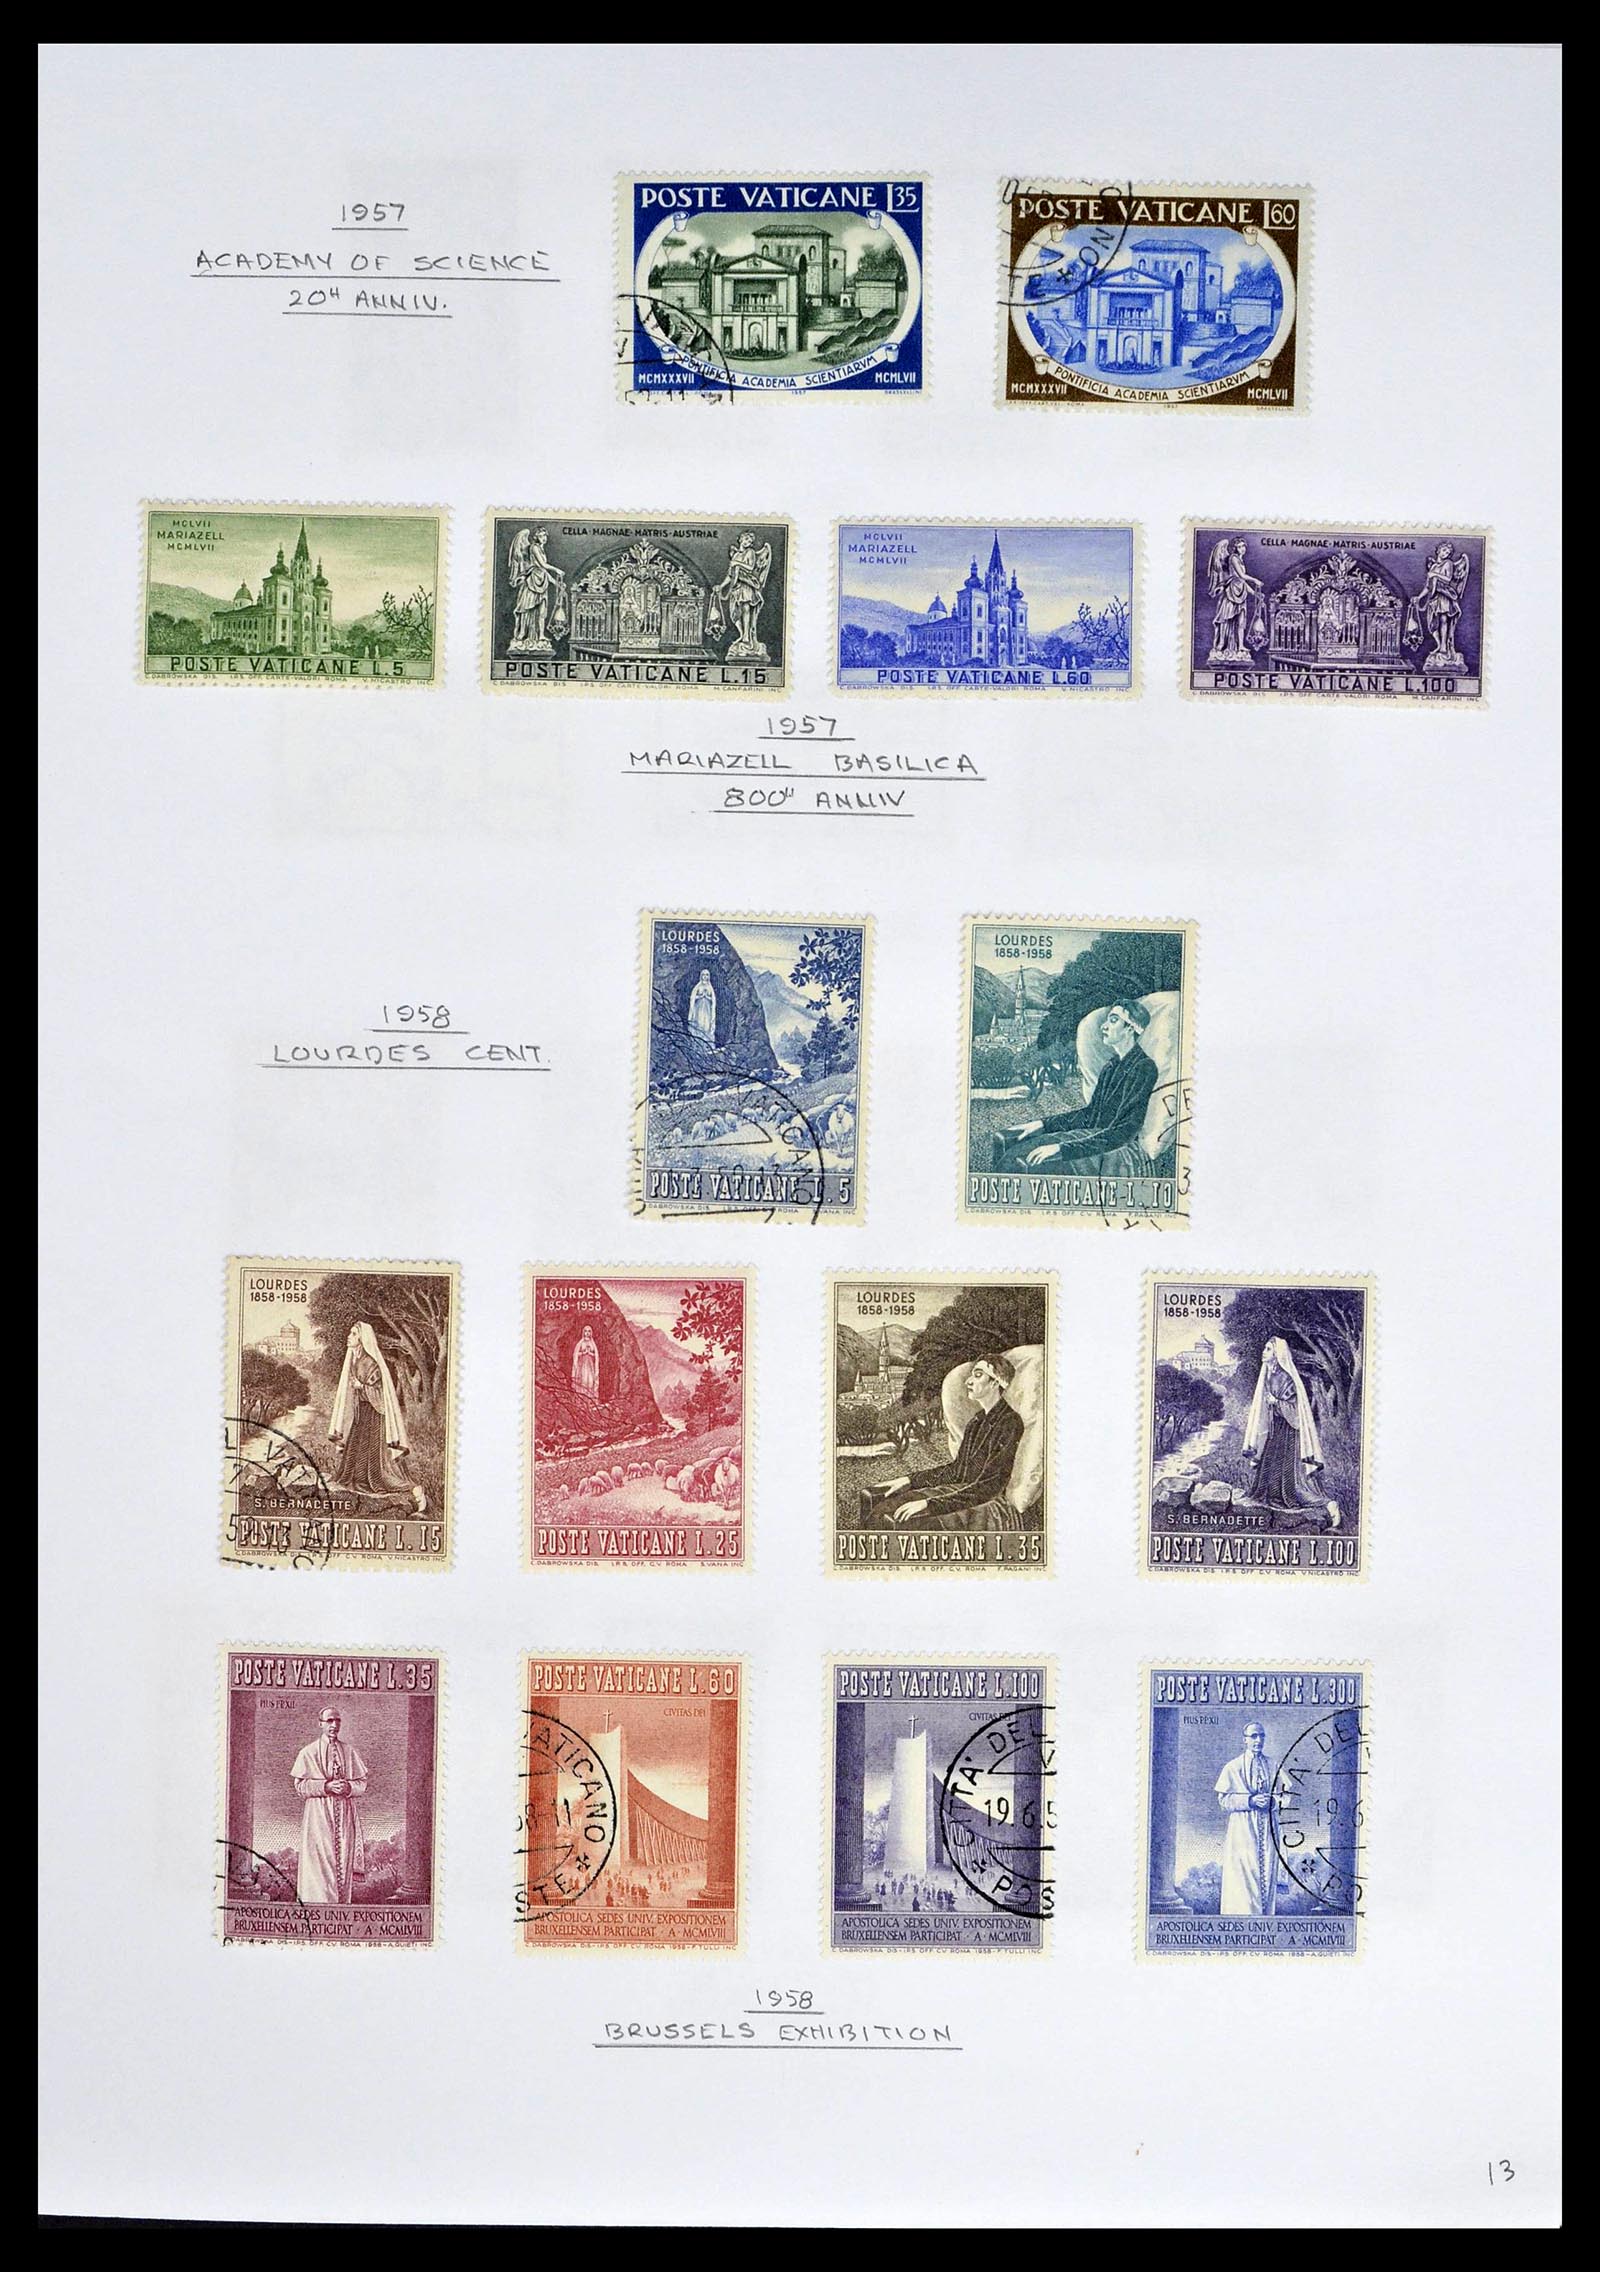 39099 0015 - Stamp collection 39099 Vatican 1852-2008.